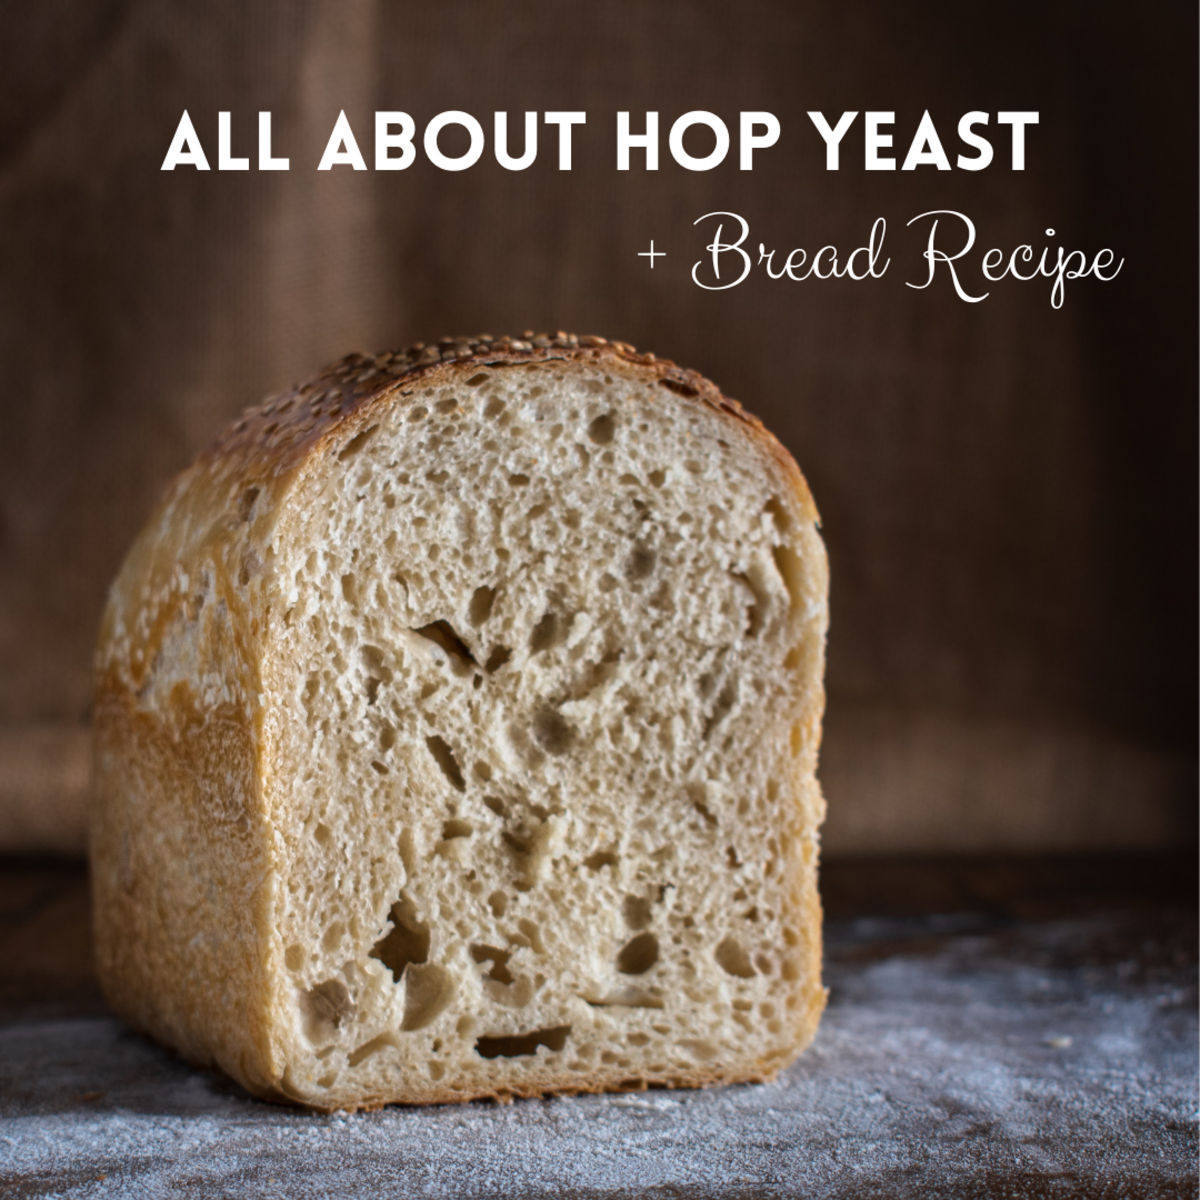 I discovered hop yeast in a quest to relieve my son's ADHD symptoms.